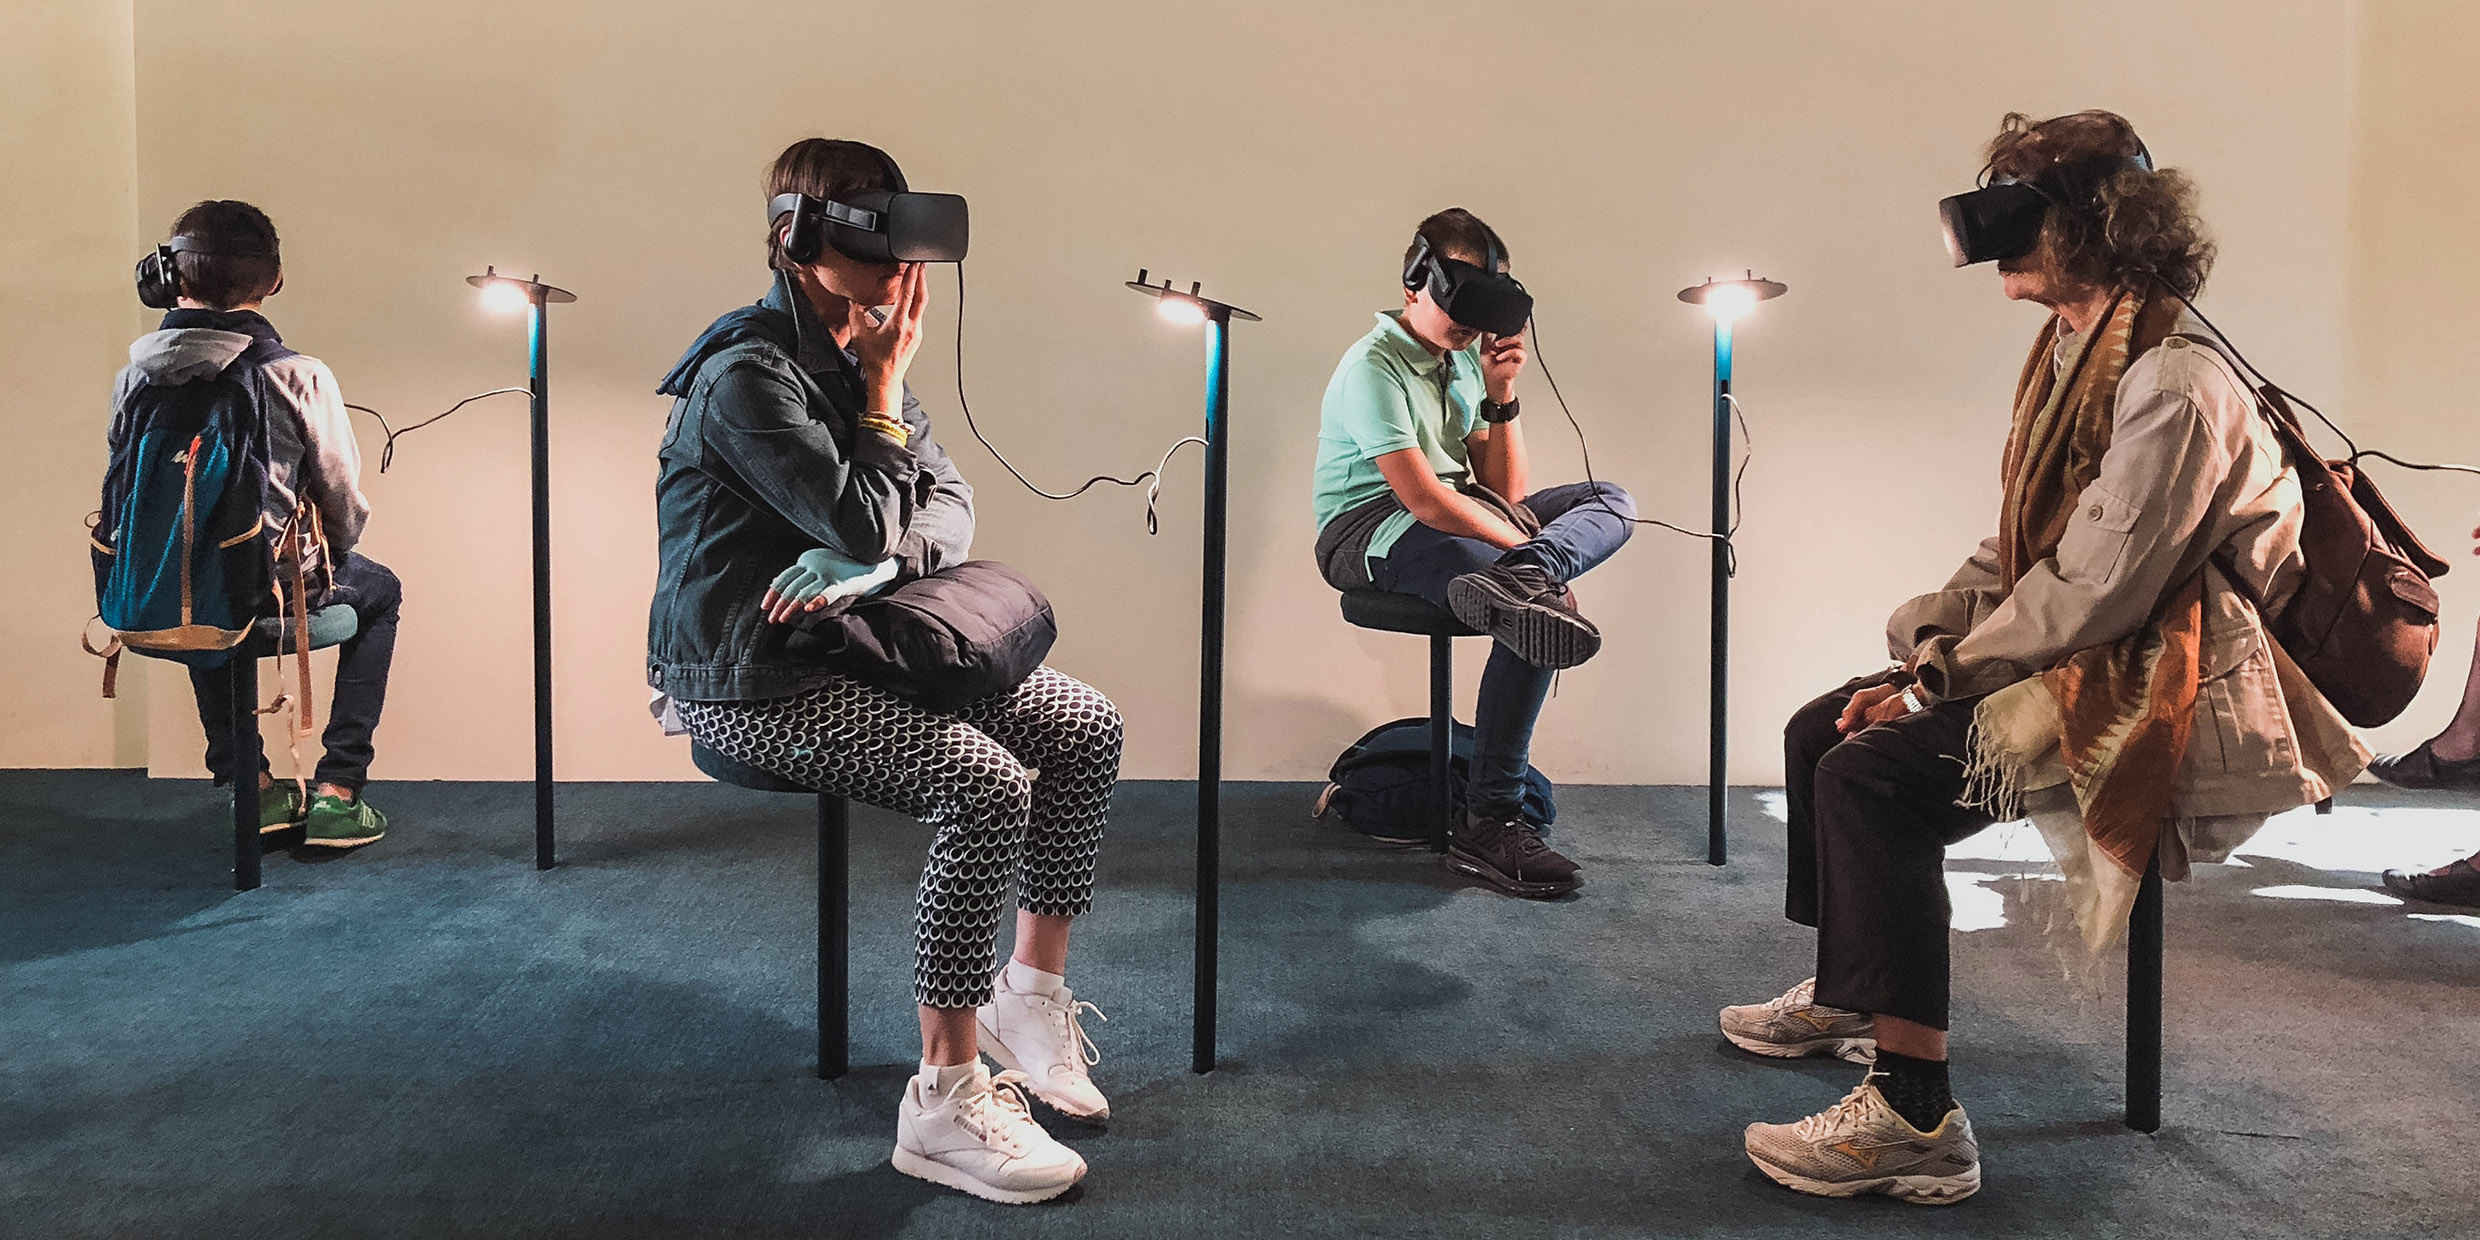 Image of group of people wearing VR headsets